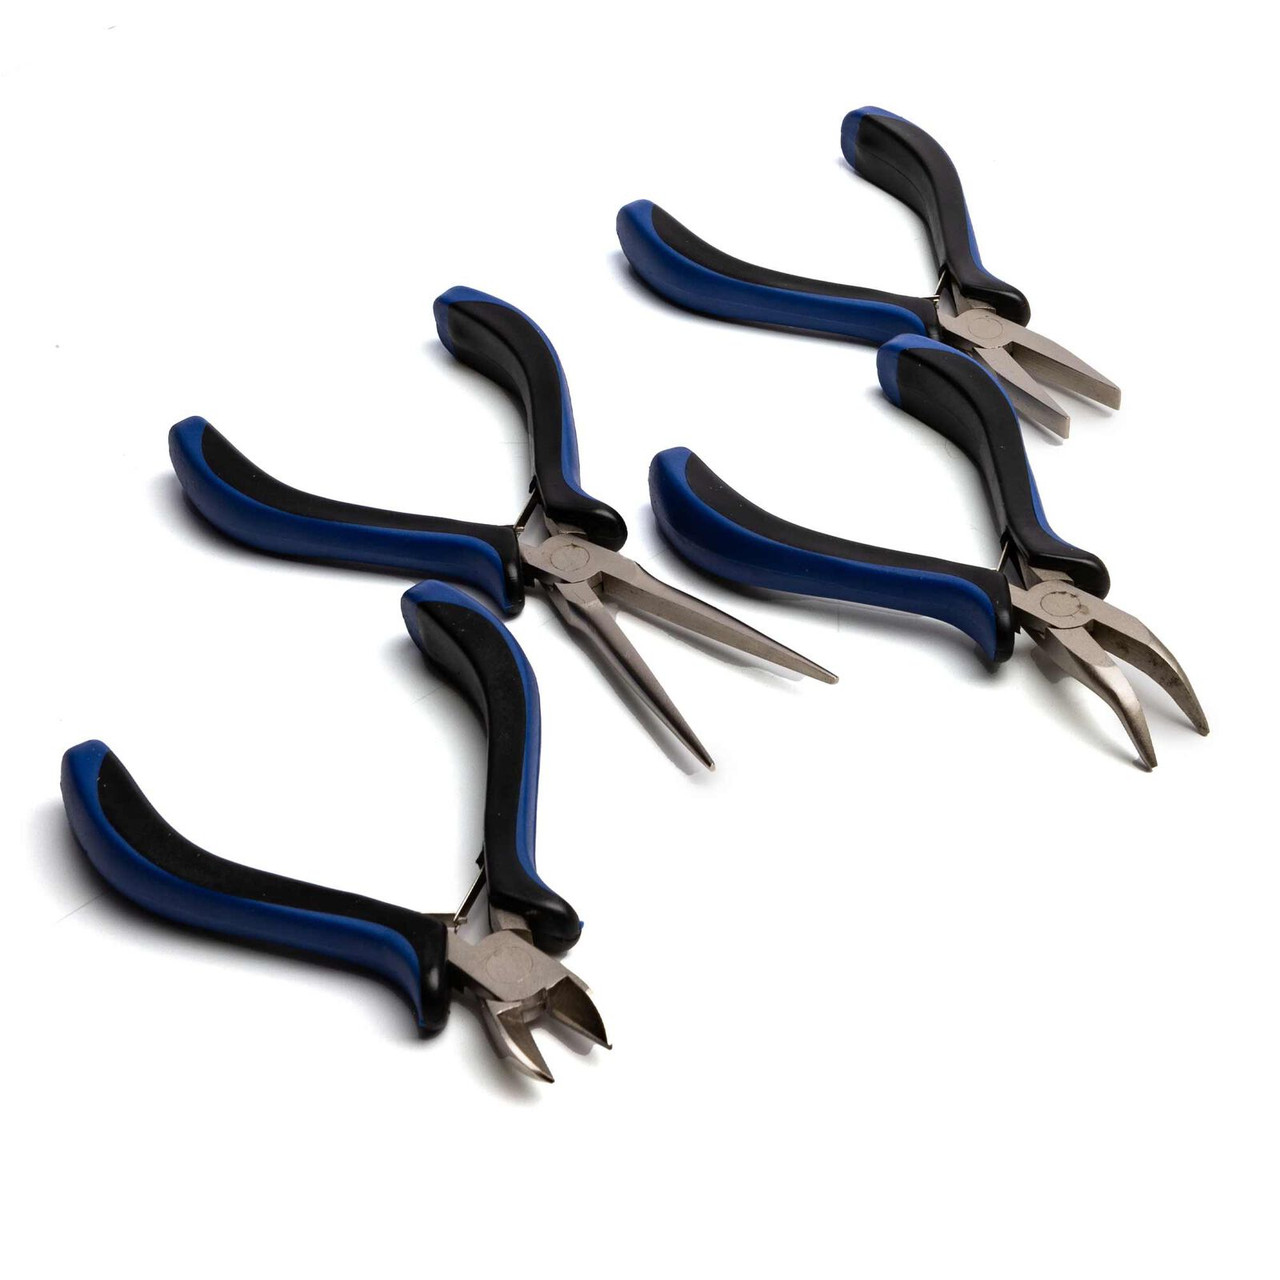 Hobby Essentials Pliers, Springloaded Set (4pc)